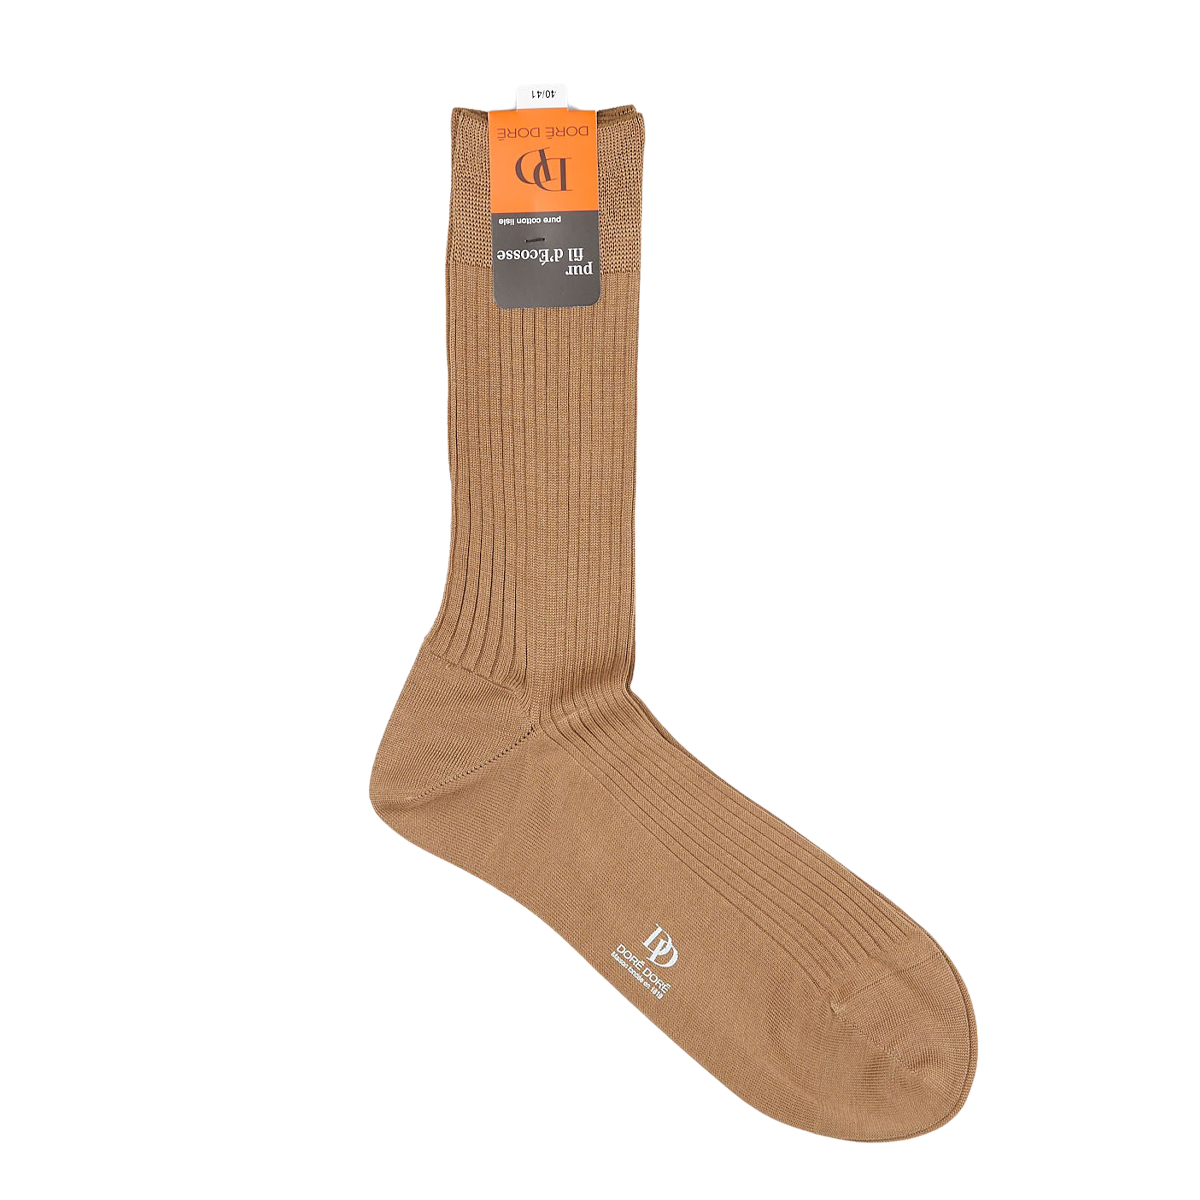 A single Doré Doré Faon Beige Cotton Fil d'Ècosse Ribbed Sock with a hand-linked toe, displayed flat with an orange and white product tag.